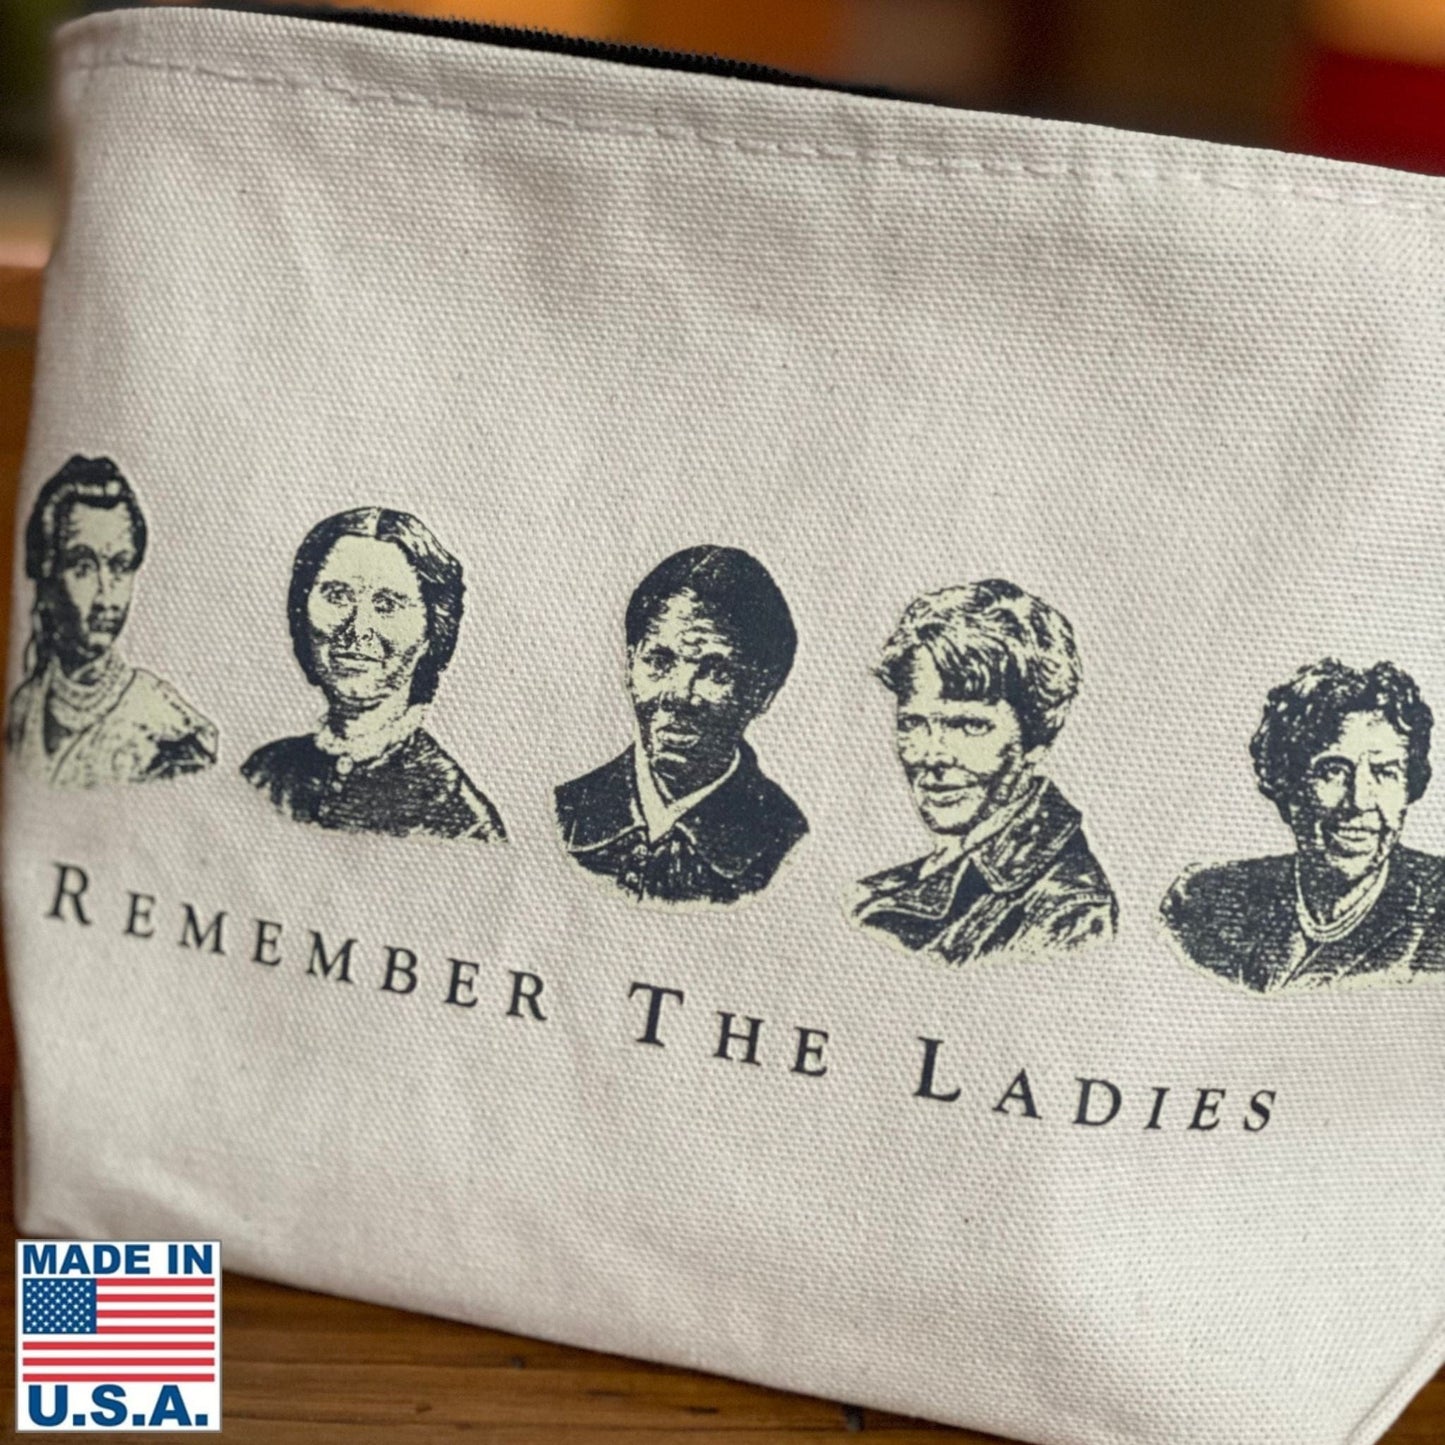 "Remember the Ladies" small canvas bag from the history list store